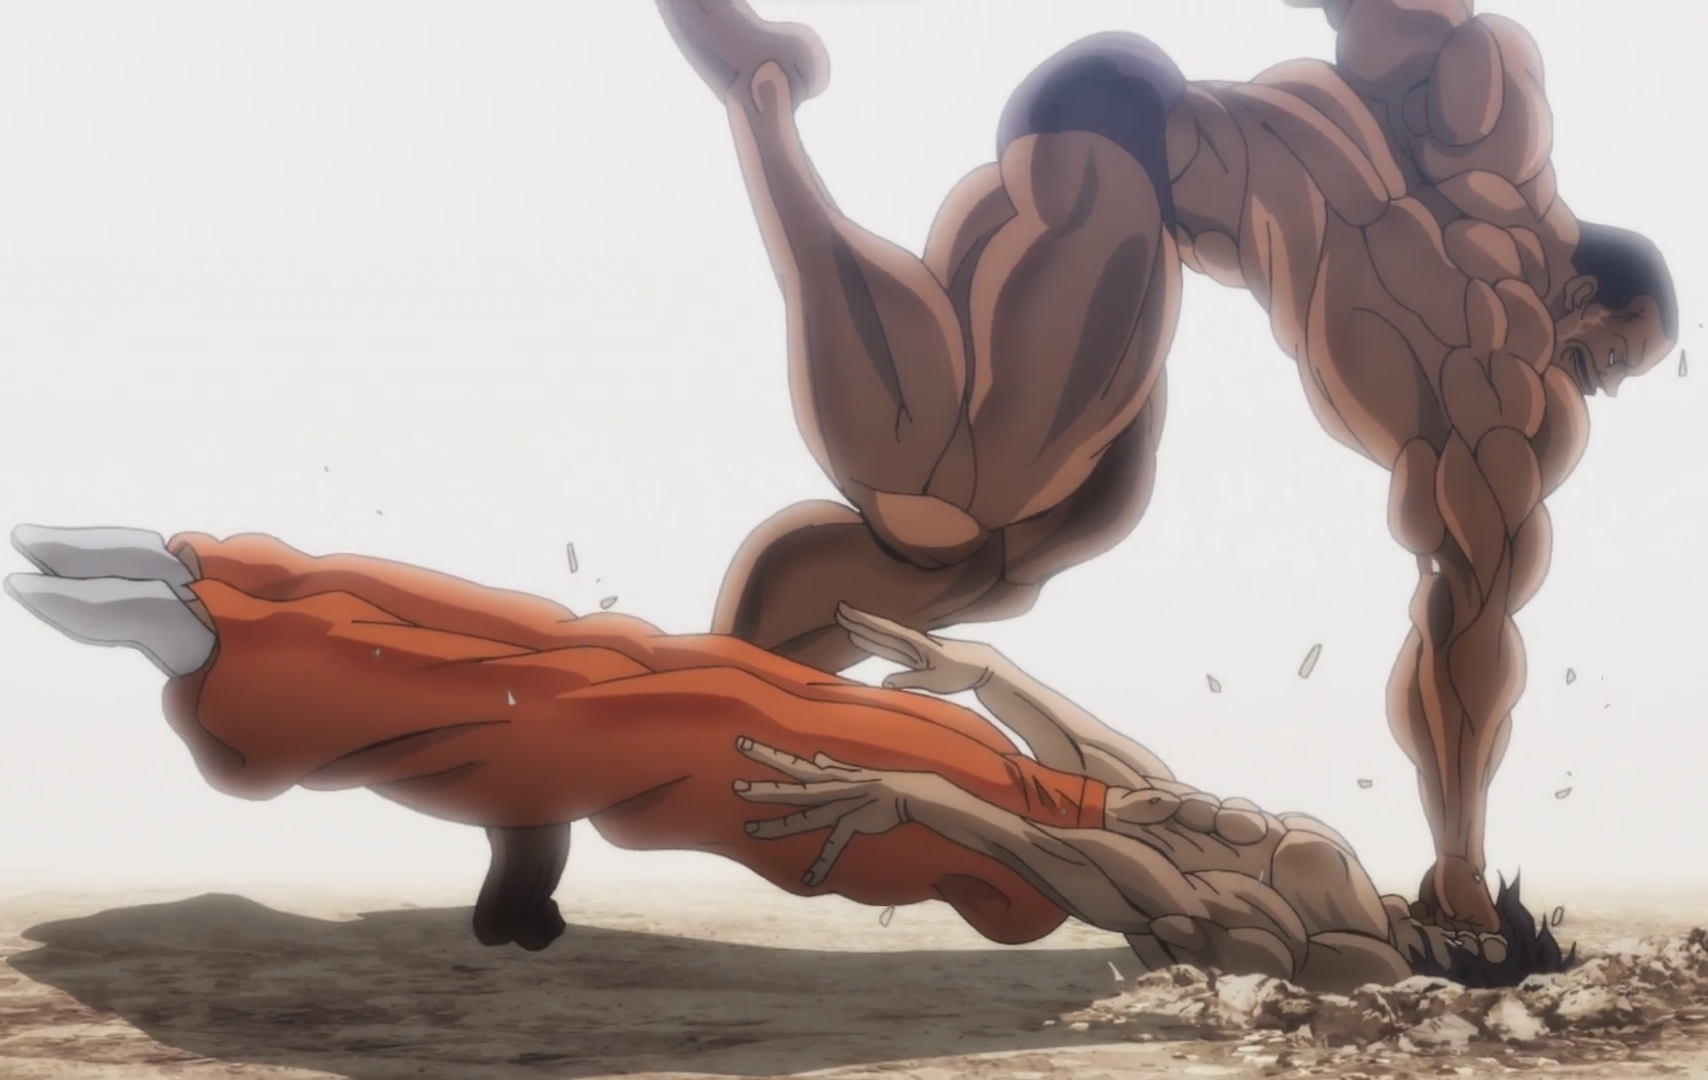 How to Watch Baki in Order: A Complete Guide for the Ultimate Martial Arts  Anime